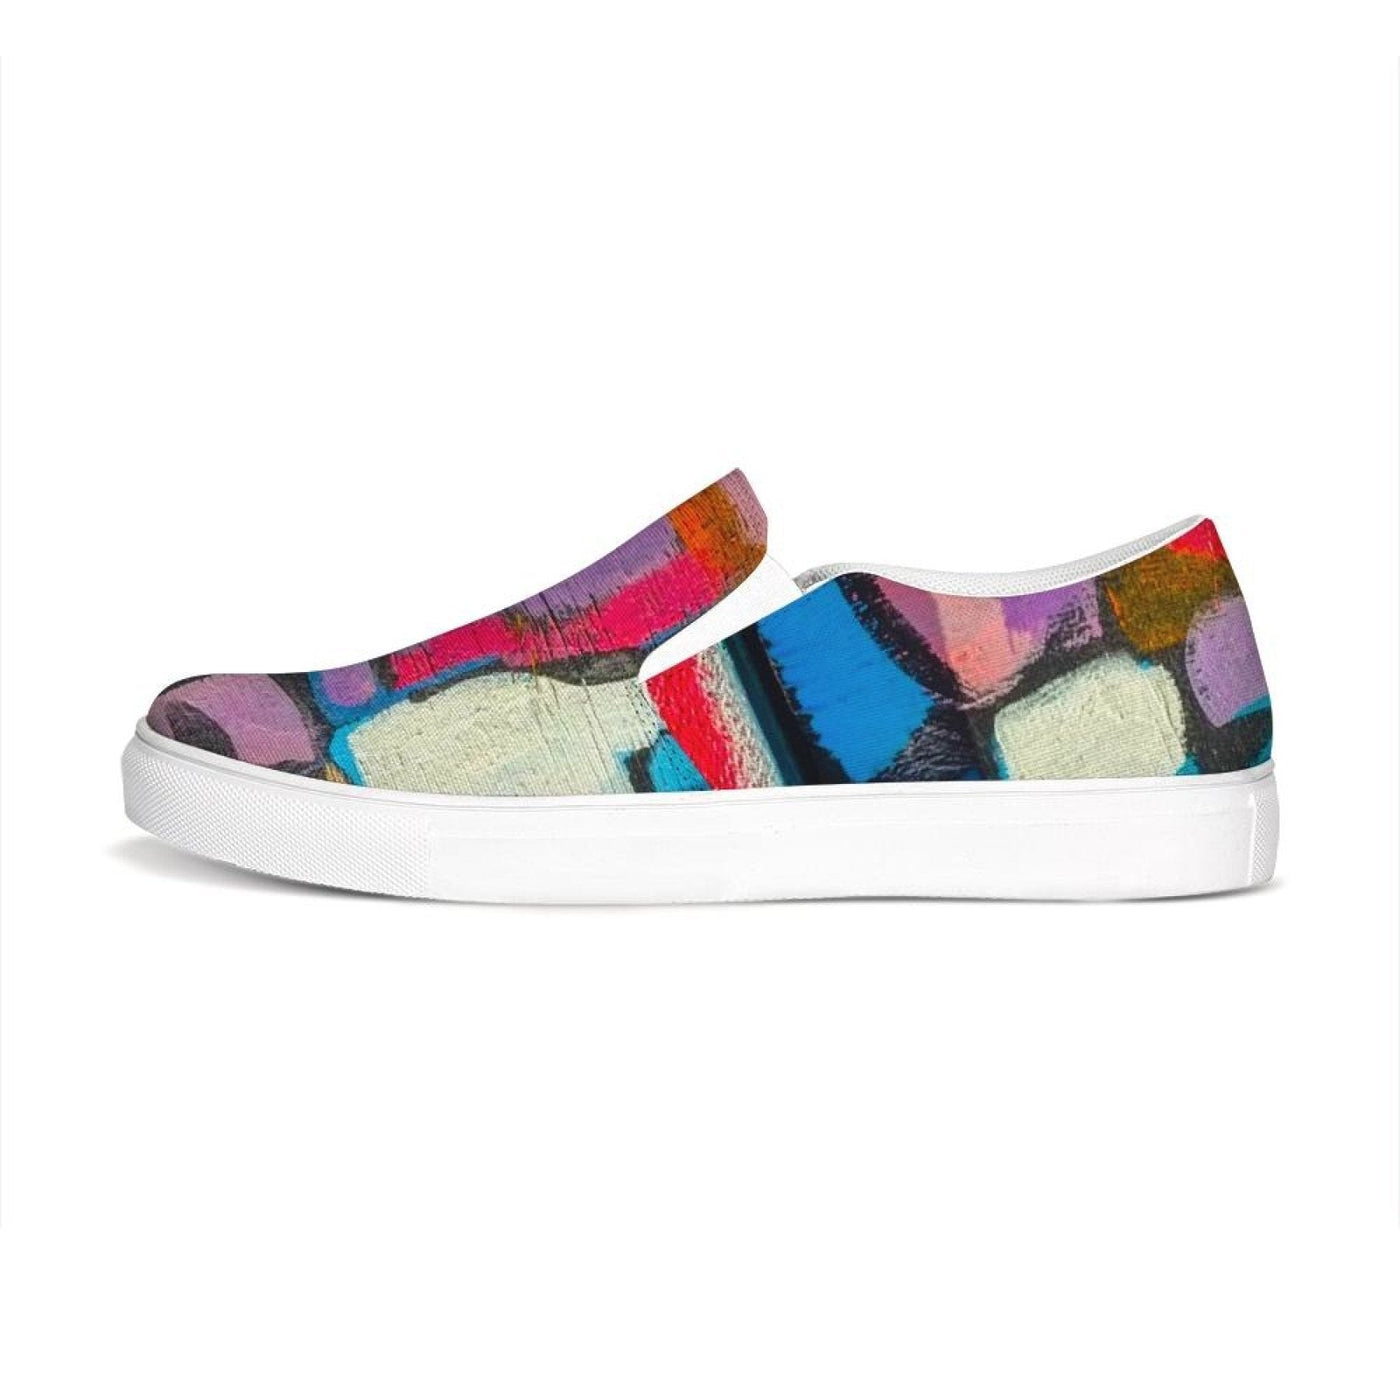 Womens Sneakers - Multicolor Geometric Style Low Top Slip-on Canvas Shoes -